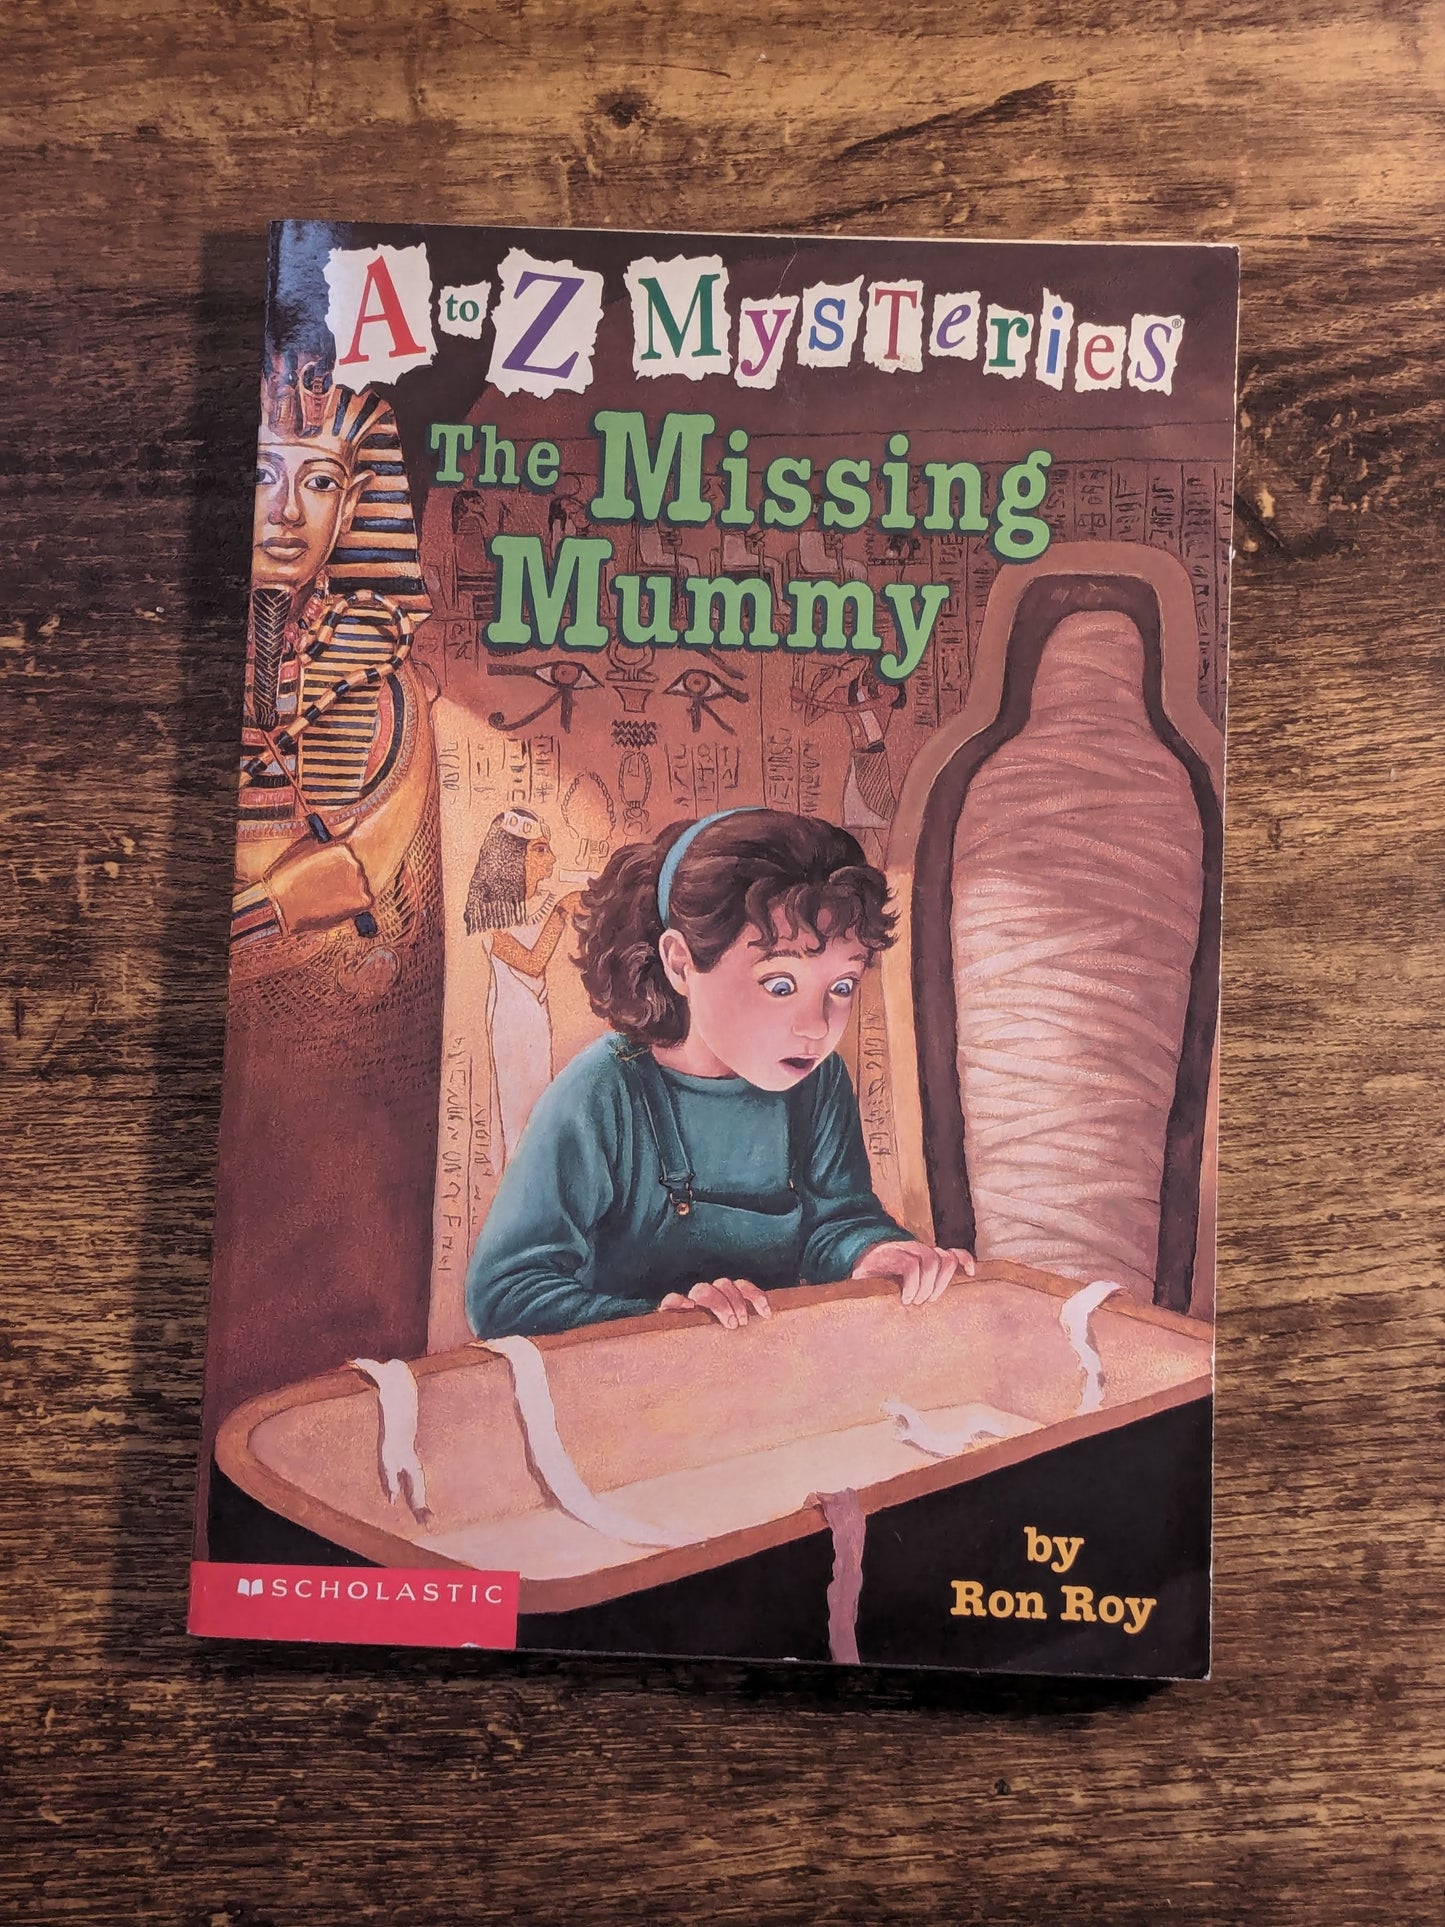 Missing Mummy, The (A to Z Mysteries) by Ron Roy - Vintage Paperback